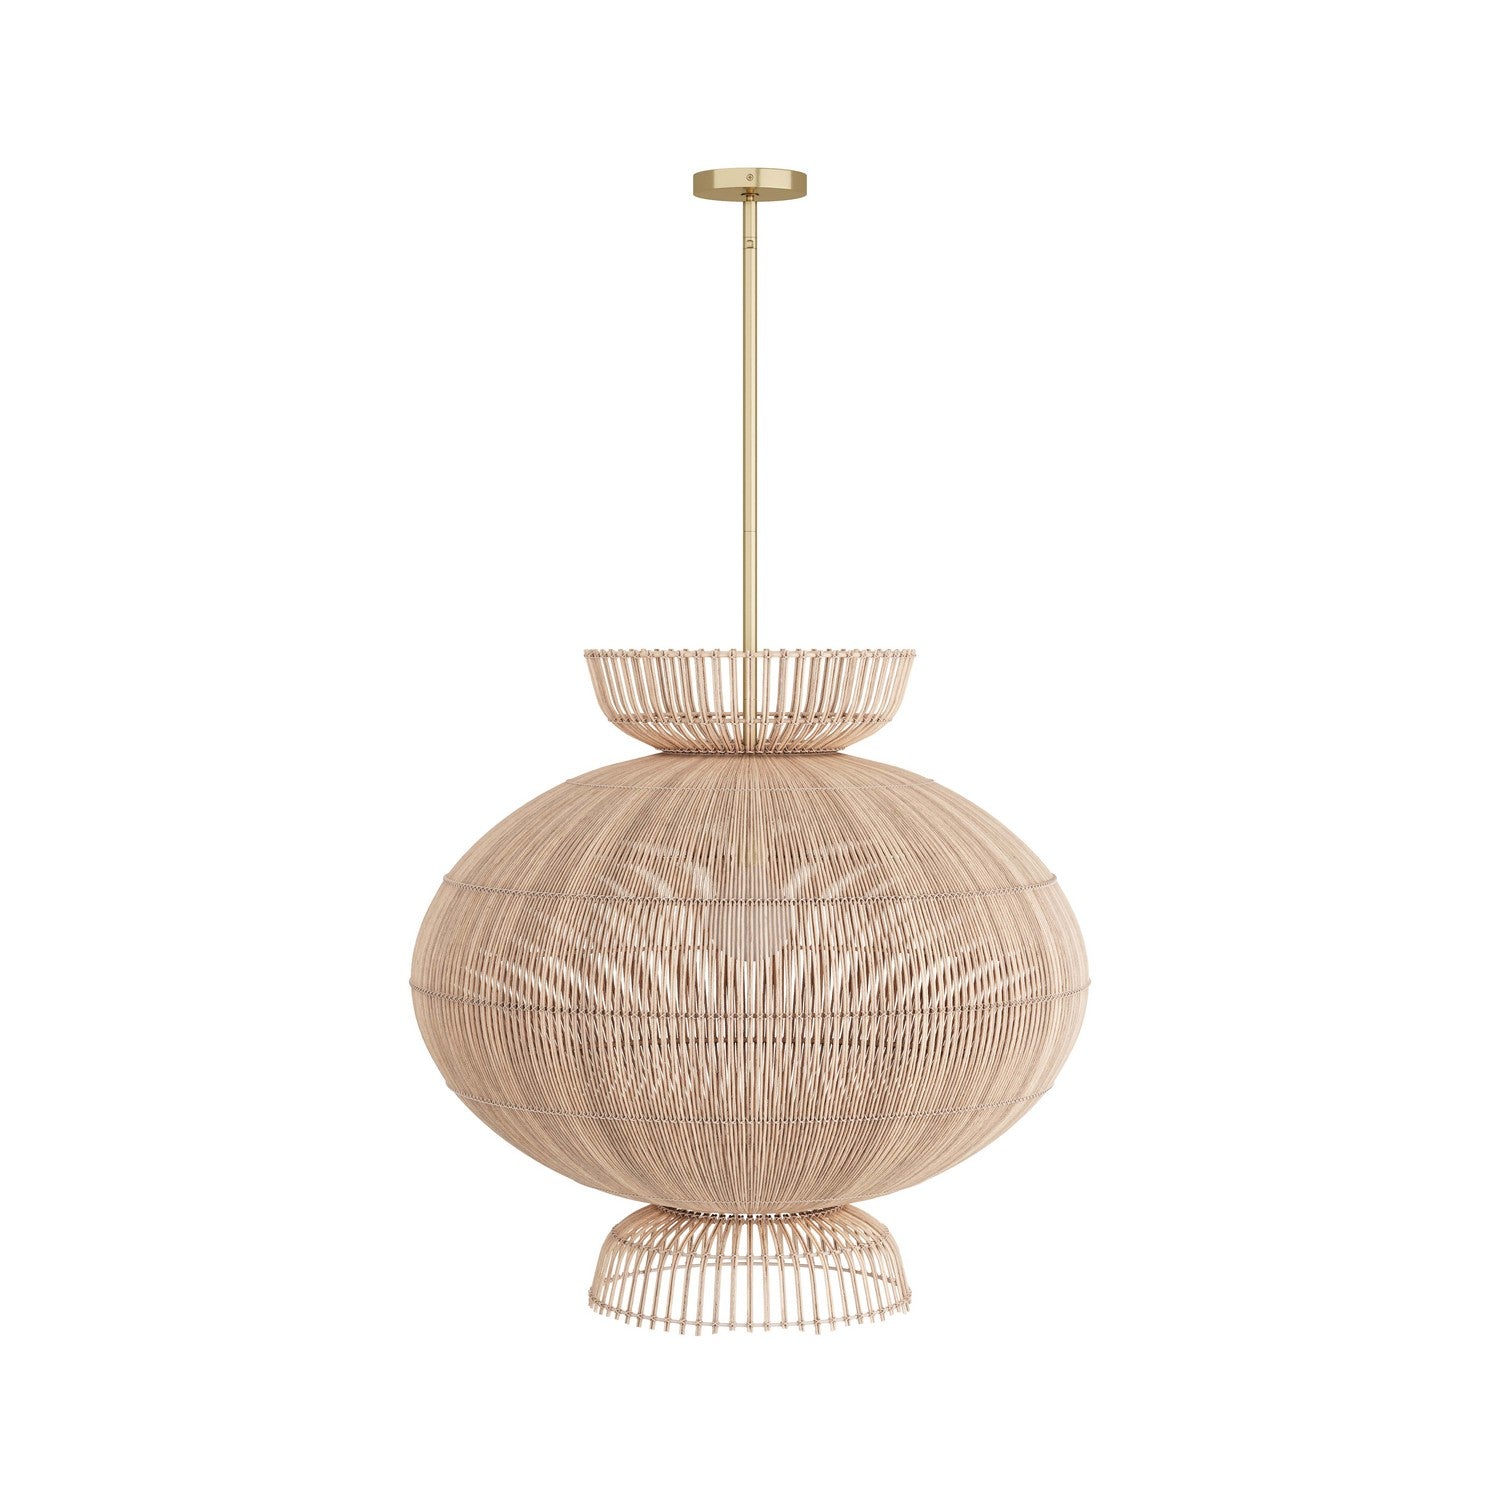 One Light Pendant from the Vanora collection in Natural finish